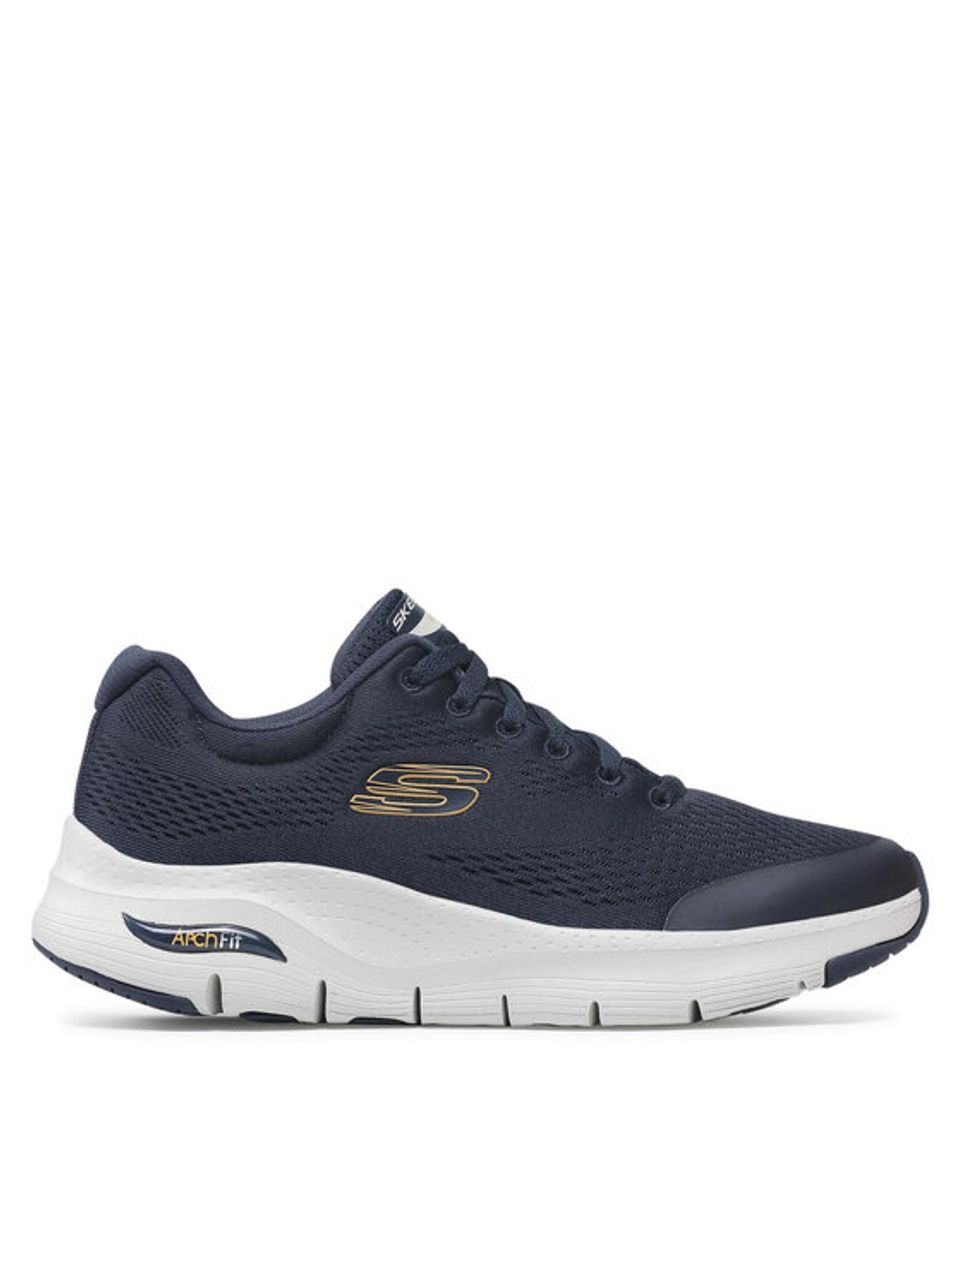 Skechers Sneakers Arch Fit 232040/NVY Dunkelblau